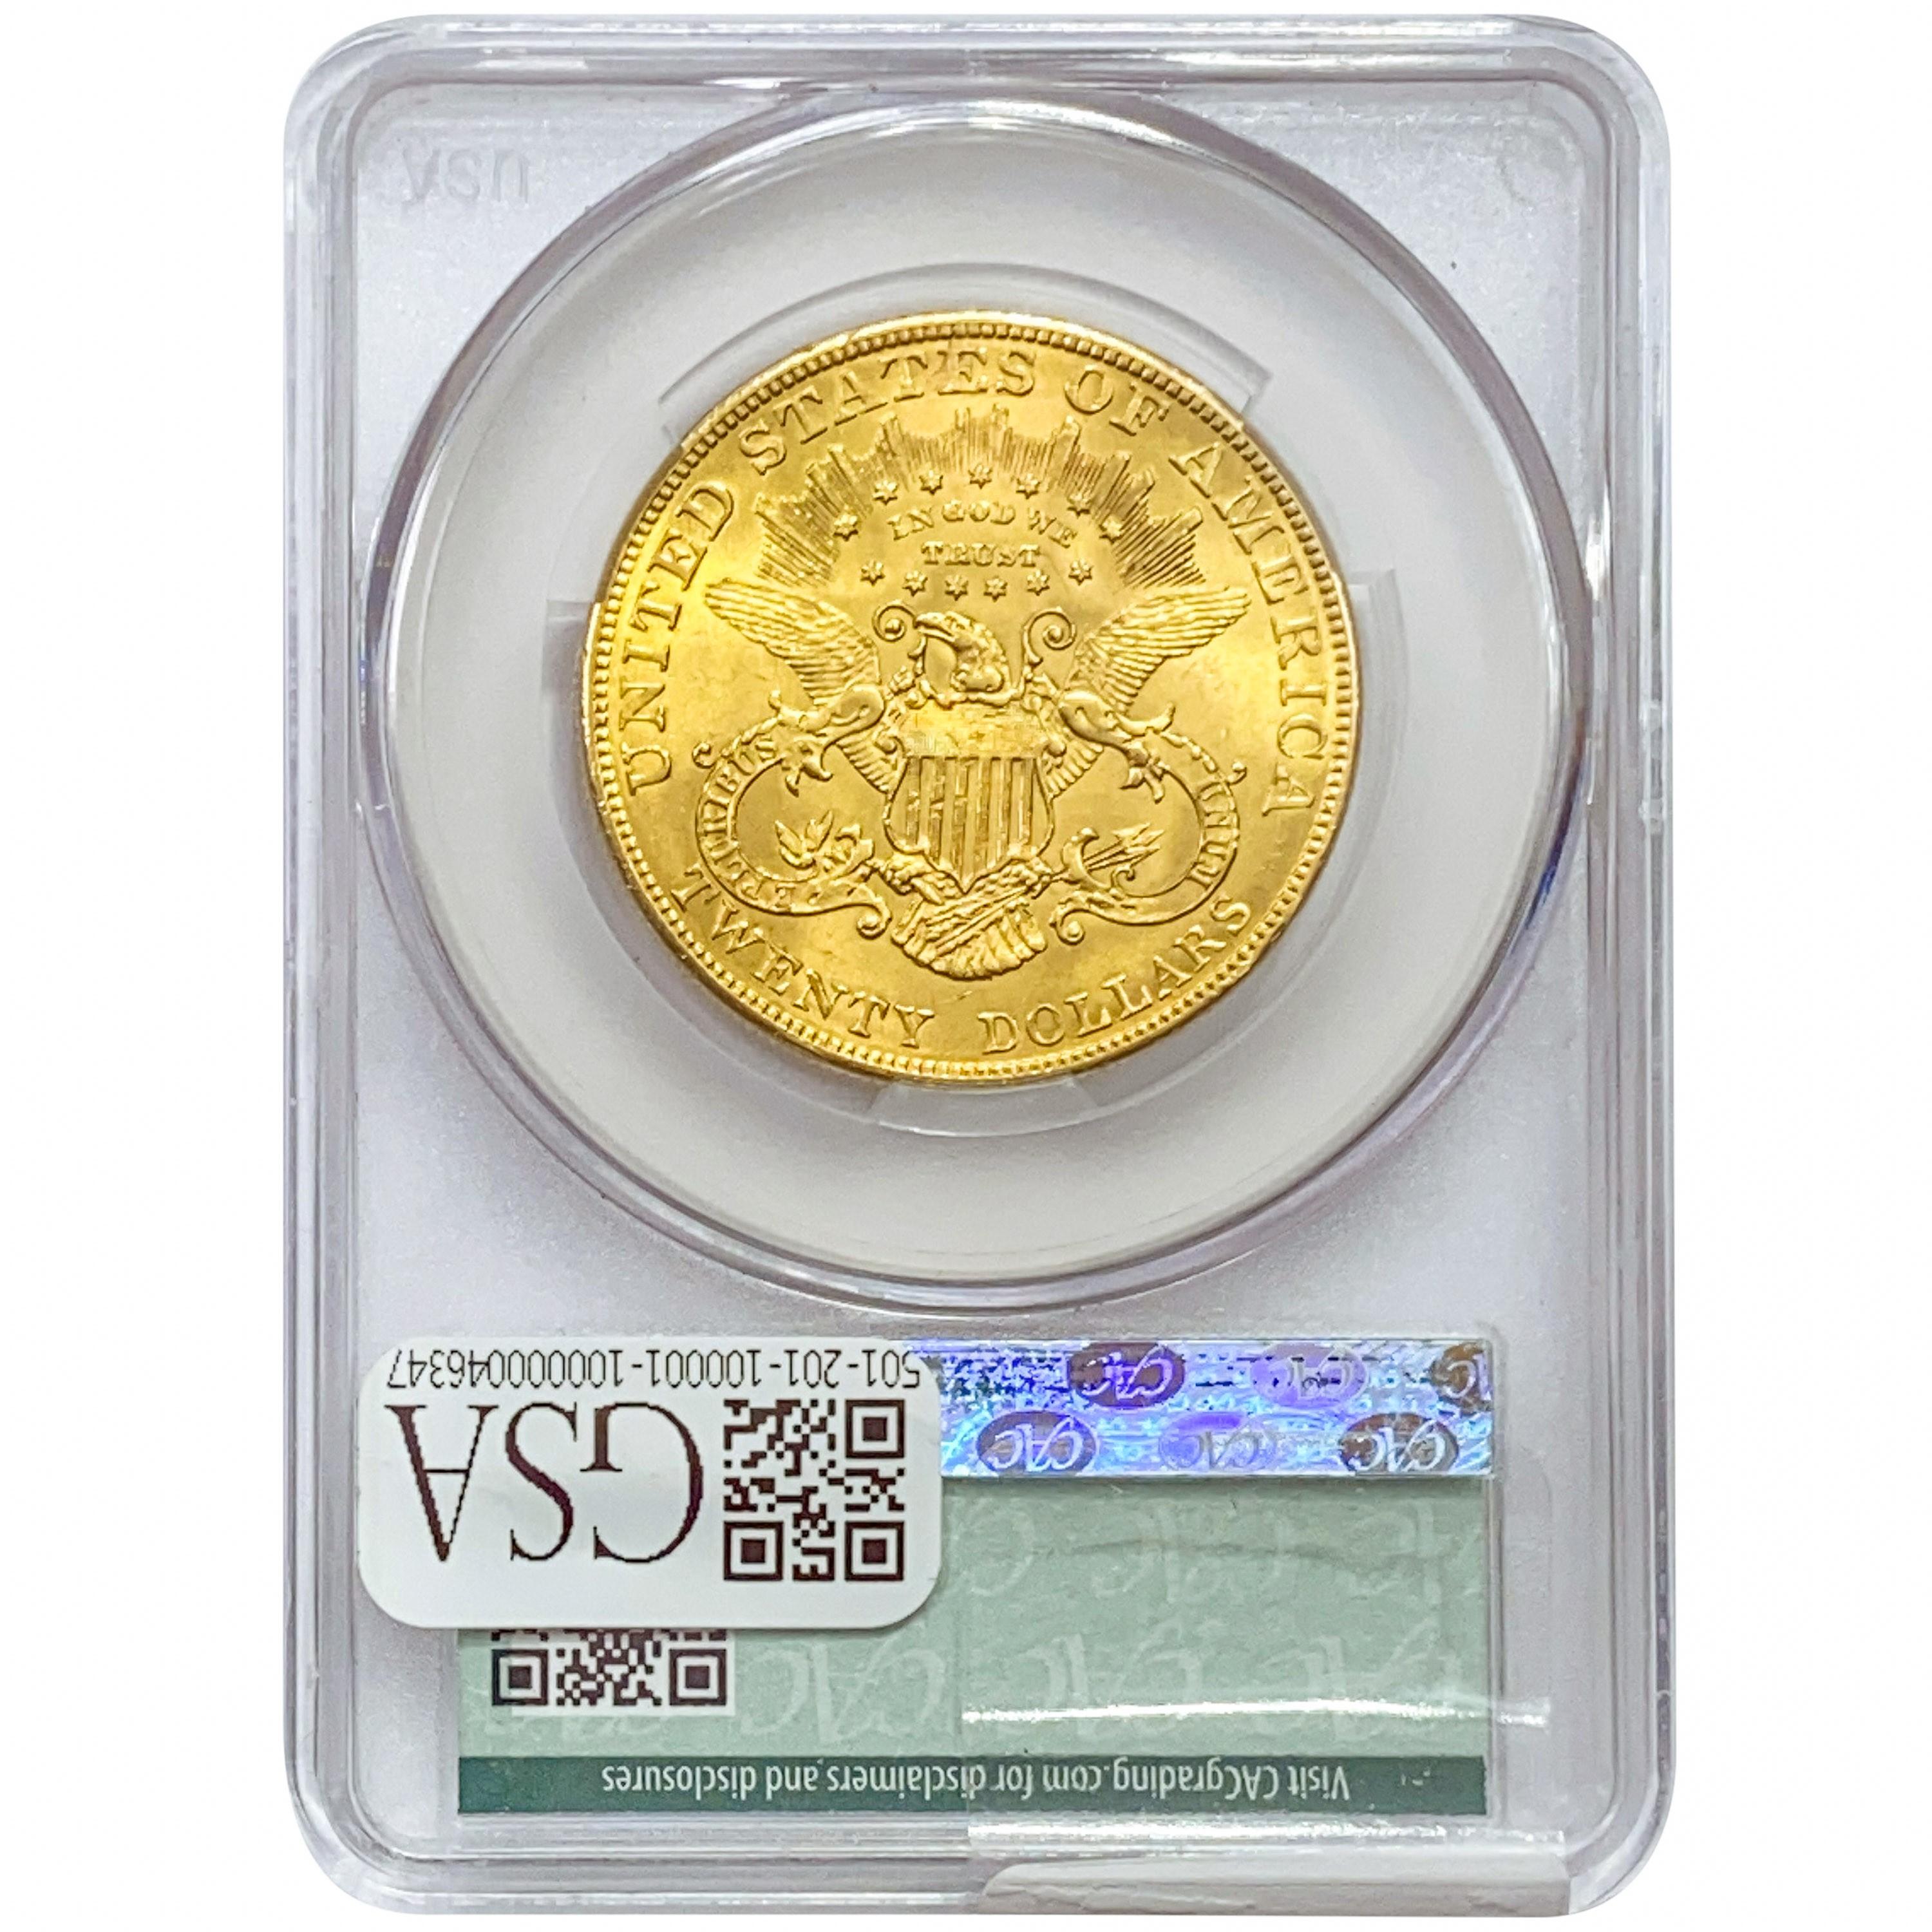 1904 CAC $20 Gold Double Eagle CAC MS62